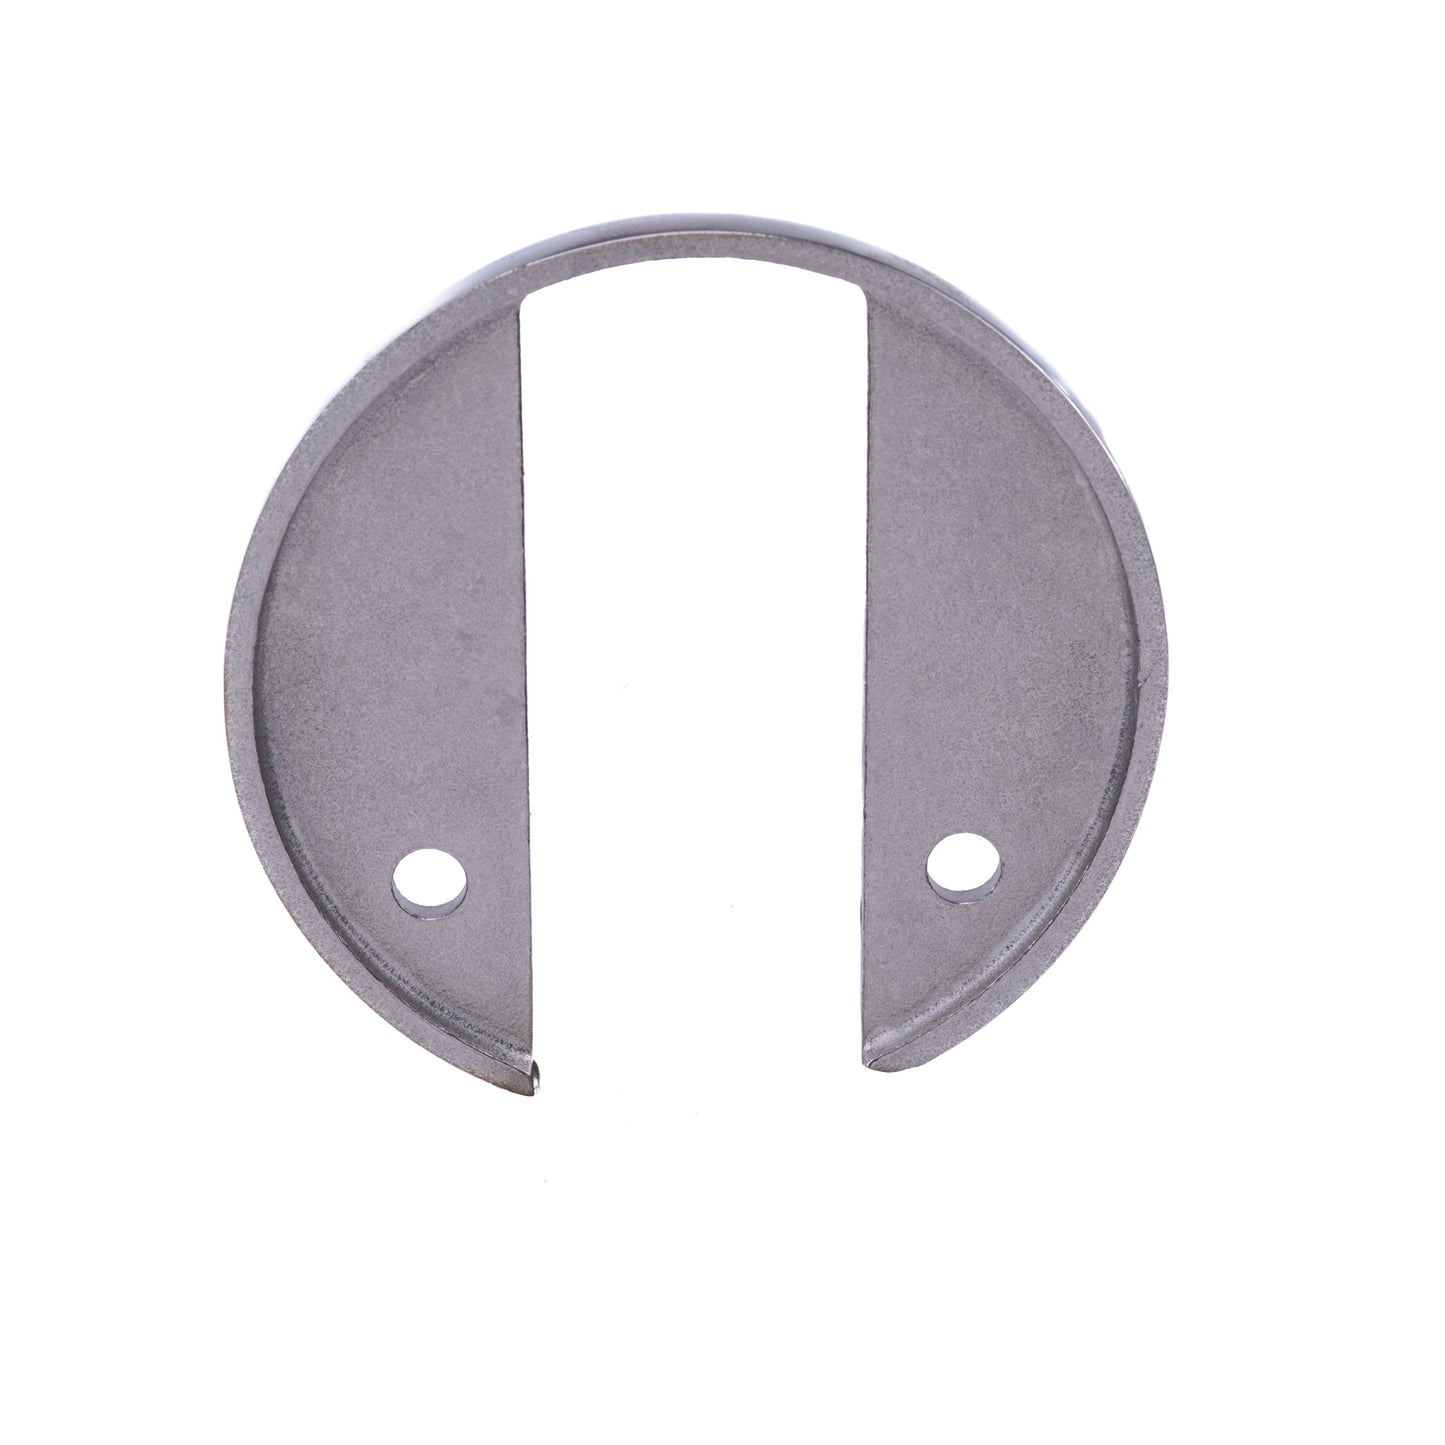 Backing Plate for 6235 "D" Style Slam Latch